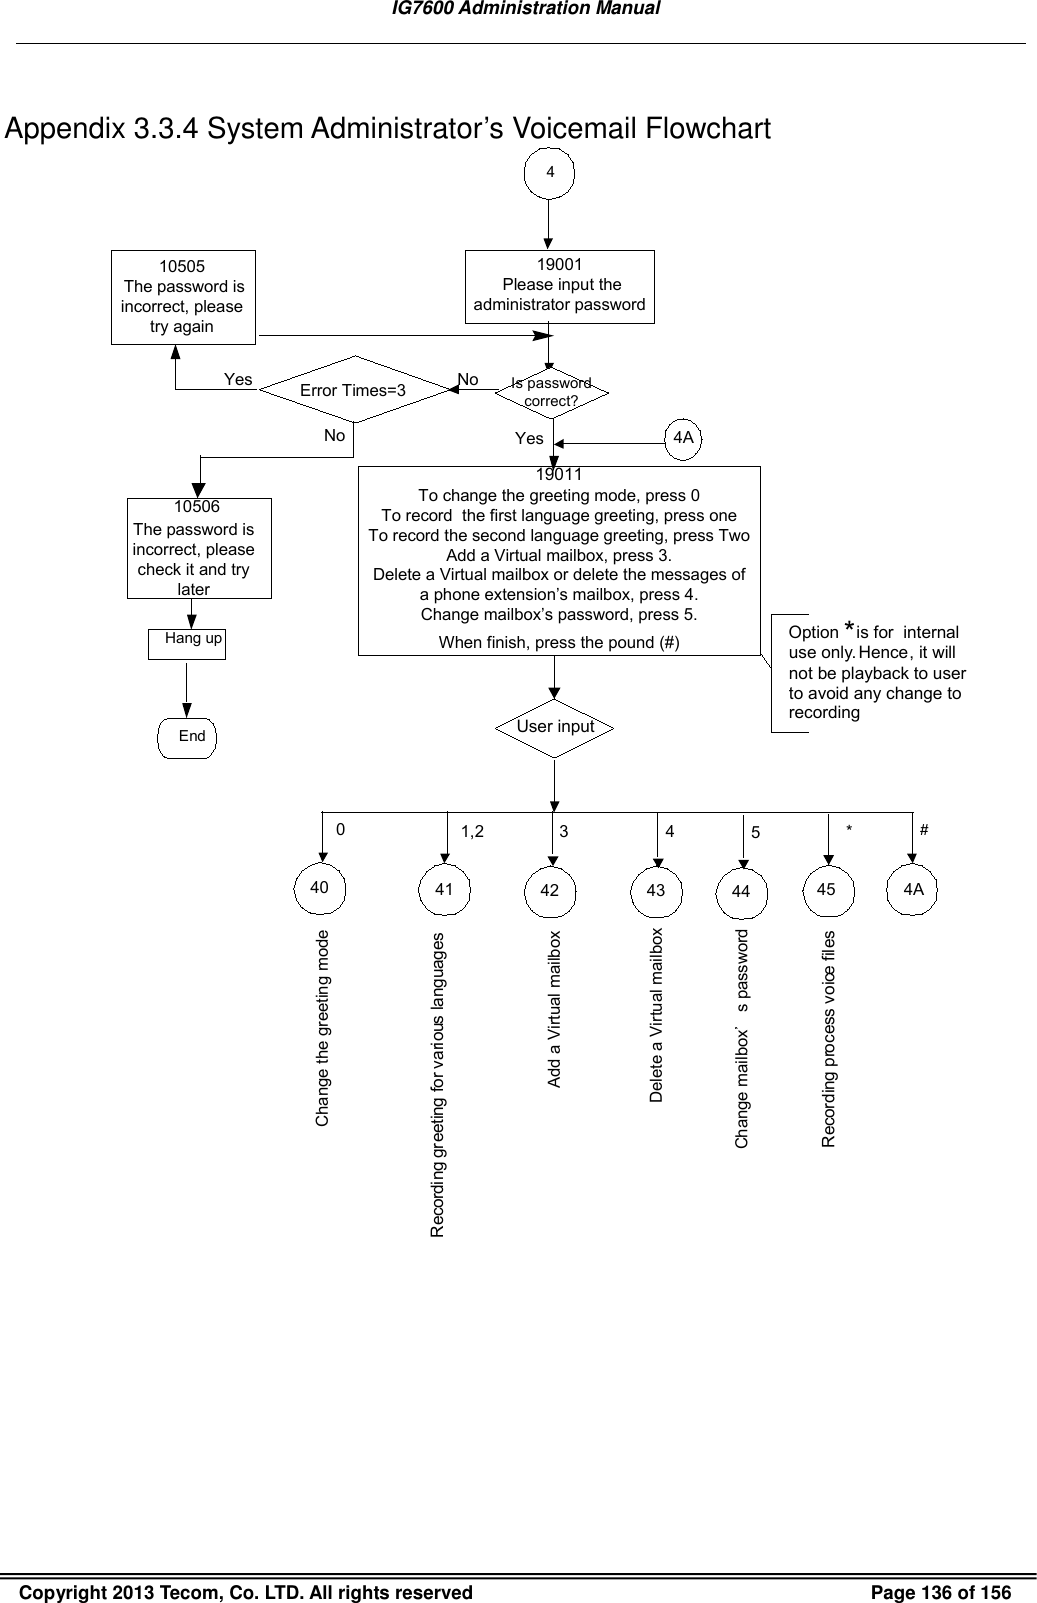   IG7600 Administration Manual  Copyright 2013 Tecom, Co. LTD. All rights reserved  Page 136 of 156  Appendix 3.3.4 System Administrator’s Voicemail Flowchart 4Yes Is passwordcorrect?YesHang upEndNo19011To change the greeting mode, press 0To record  the first language greeting, press oneTo record the second language greeting, press TwoAdd a Virtual mailbox, press 3. Delete a Virtual mailbox or delete the messages of a phone extension’s mailbox, press 4. Change mailbox’s password, press 5.When finish, press the pound (#) Option *is for  internaluse only. Hence, it willnot be playback to userto avoid any change torecordingUser input4ANo#1,241 4ARecording greeting for various languages*45Recording process voice files19001 Please input the administrator password10505 The password is incorrect, please try againError Times=310506The password is incorrect, please check it and try later40Change the greeting mode0423Add a Virtual mailbox434445Delete a Virtual mailboxChange mailbox s password 